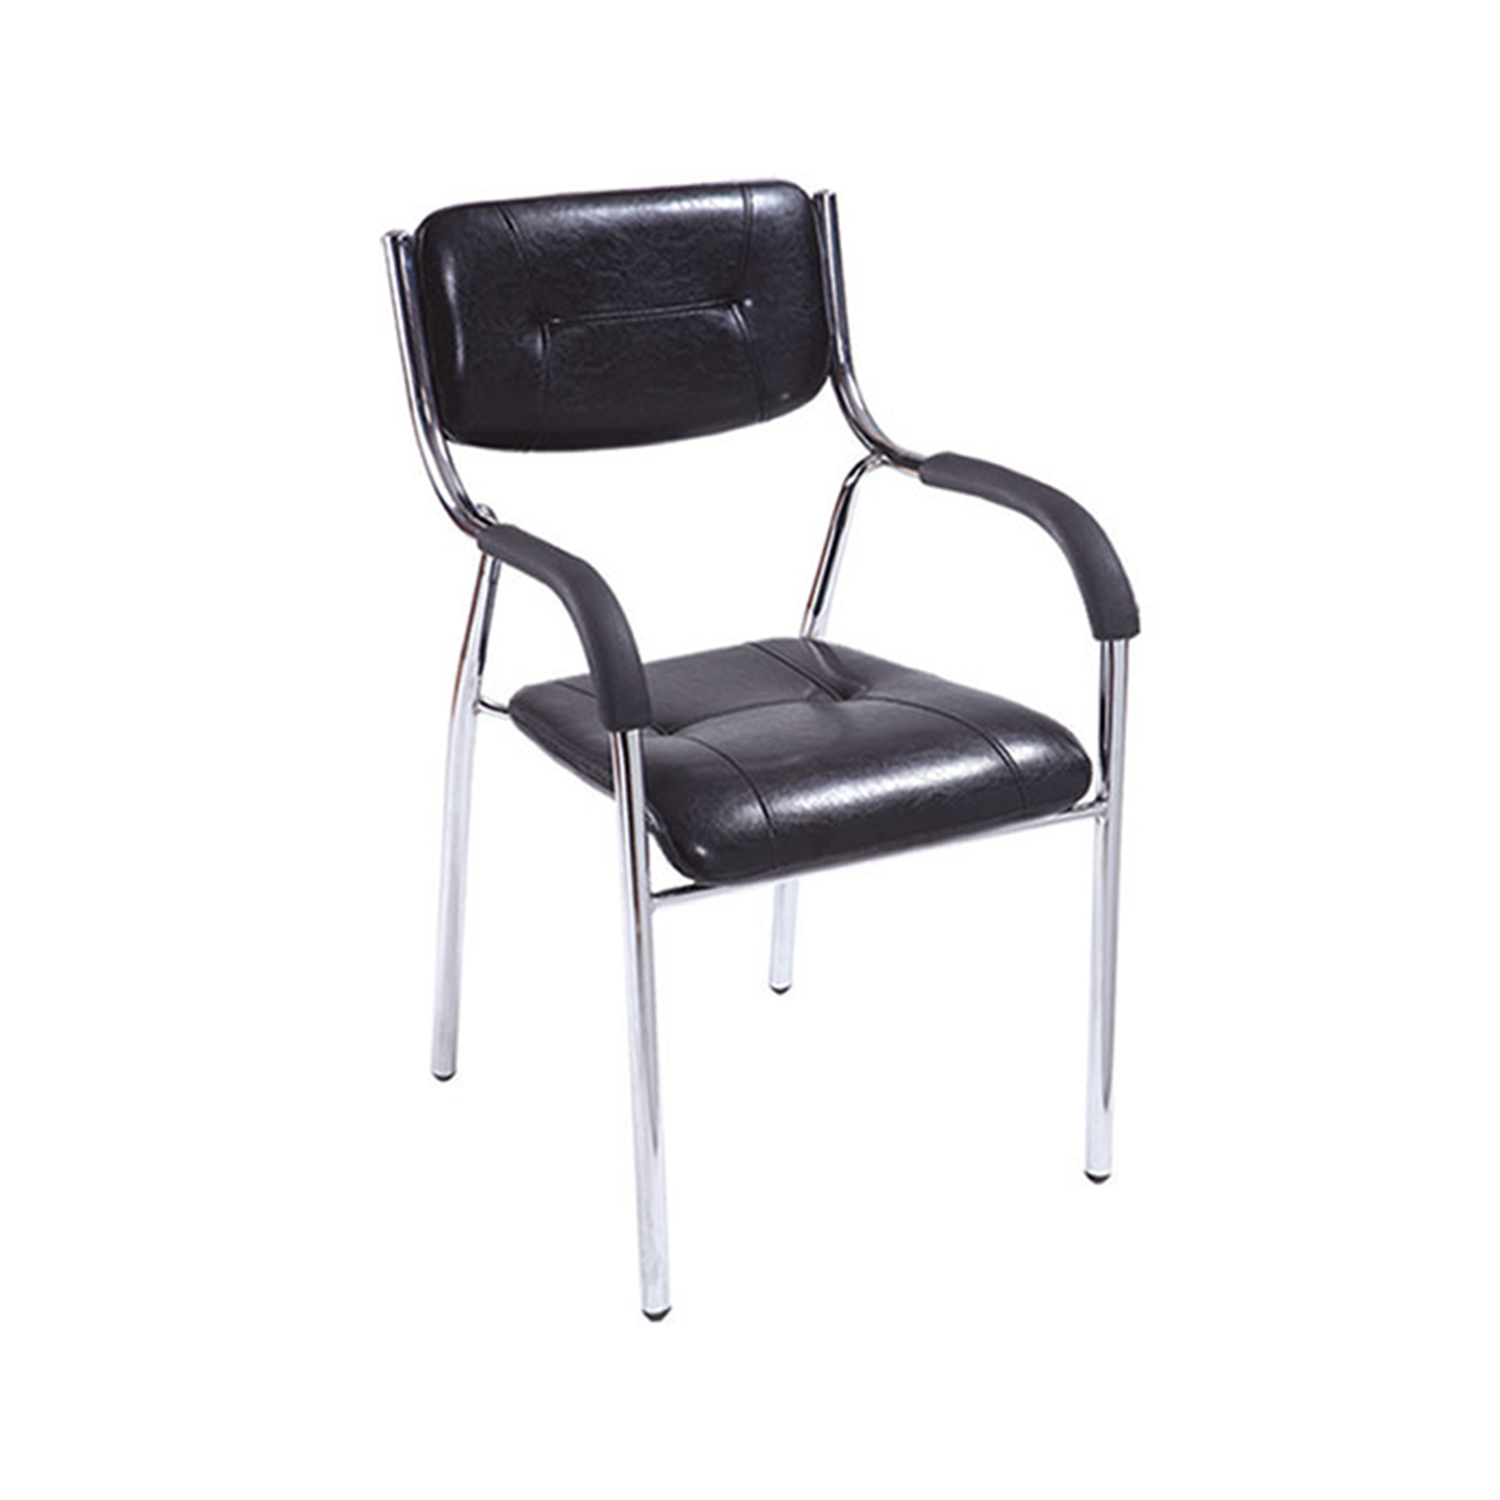 Chrome Plated Visitor Chair